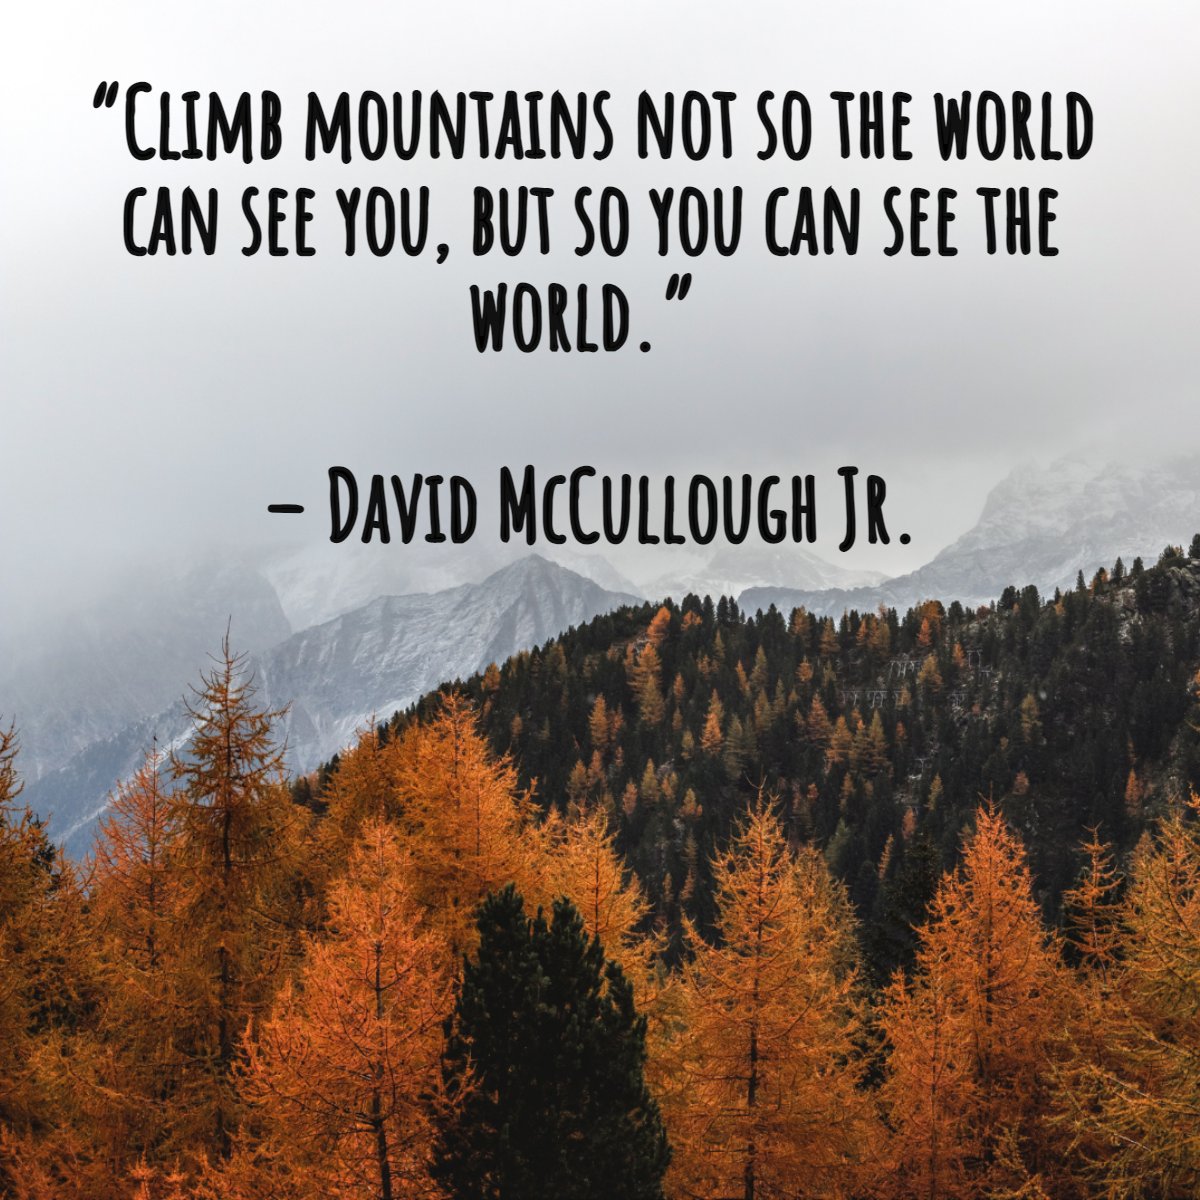 “Climb mountains not so the world can see you, but so you can see the world.”
― David McCullough Jr.

#Motivation    #MotivationalQuote    #QuoteoftheDay
#angelagribbinsrealtor #angelagribbinsrealestate #lakenormanrealty